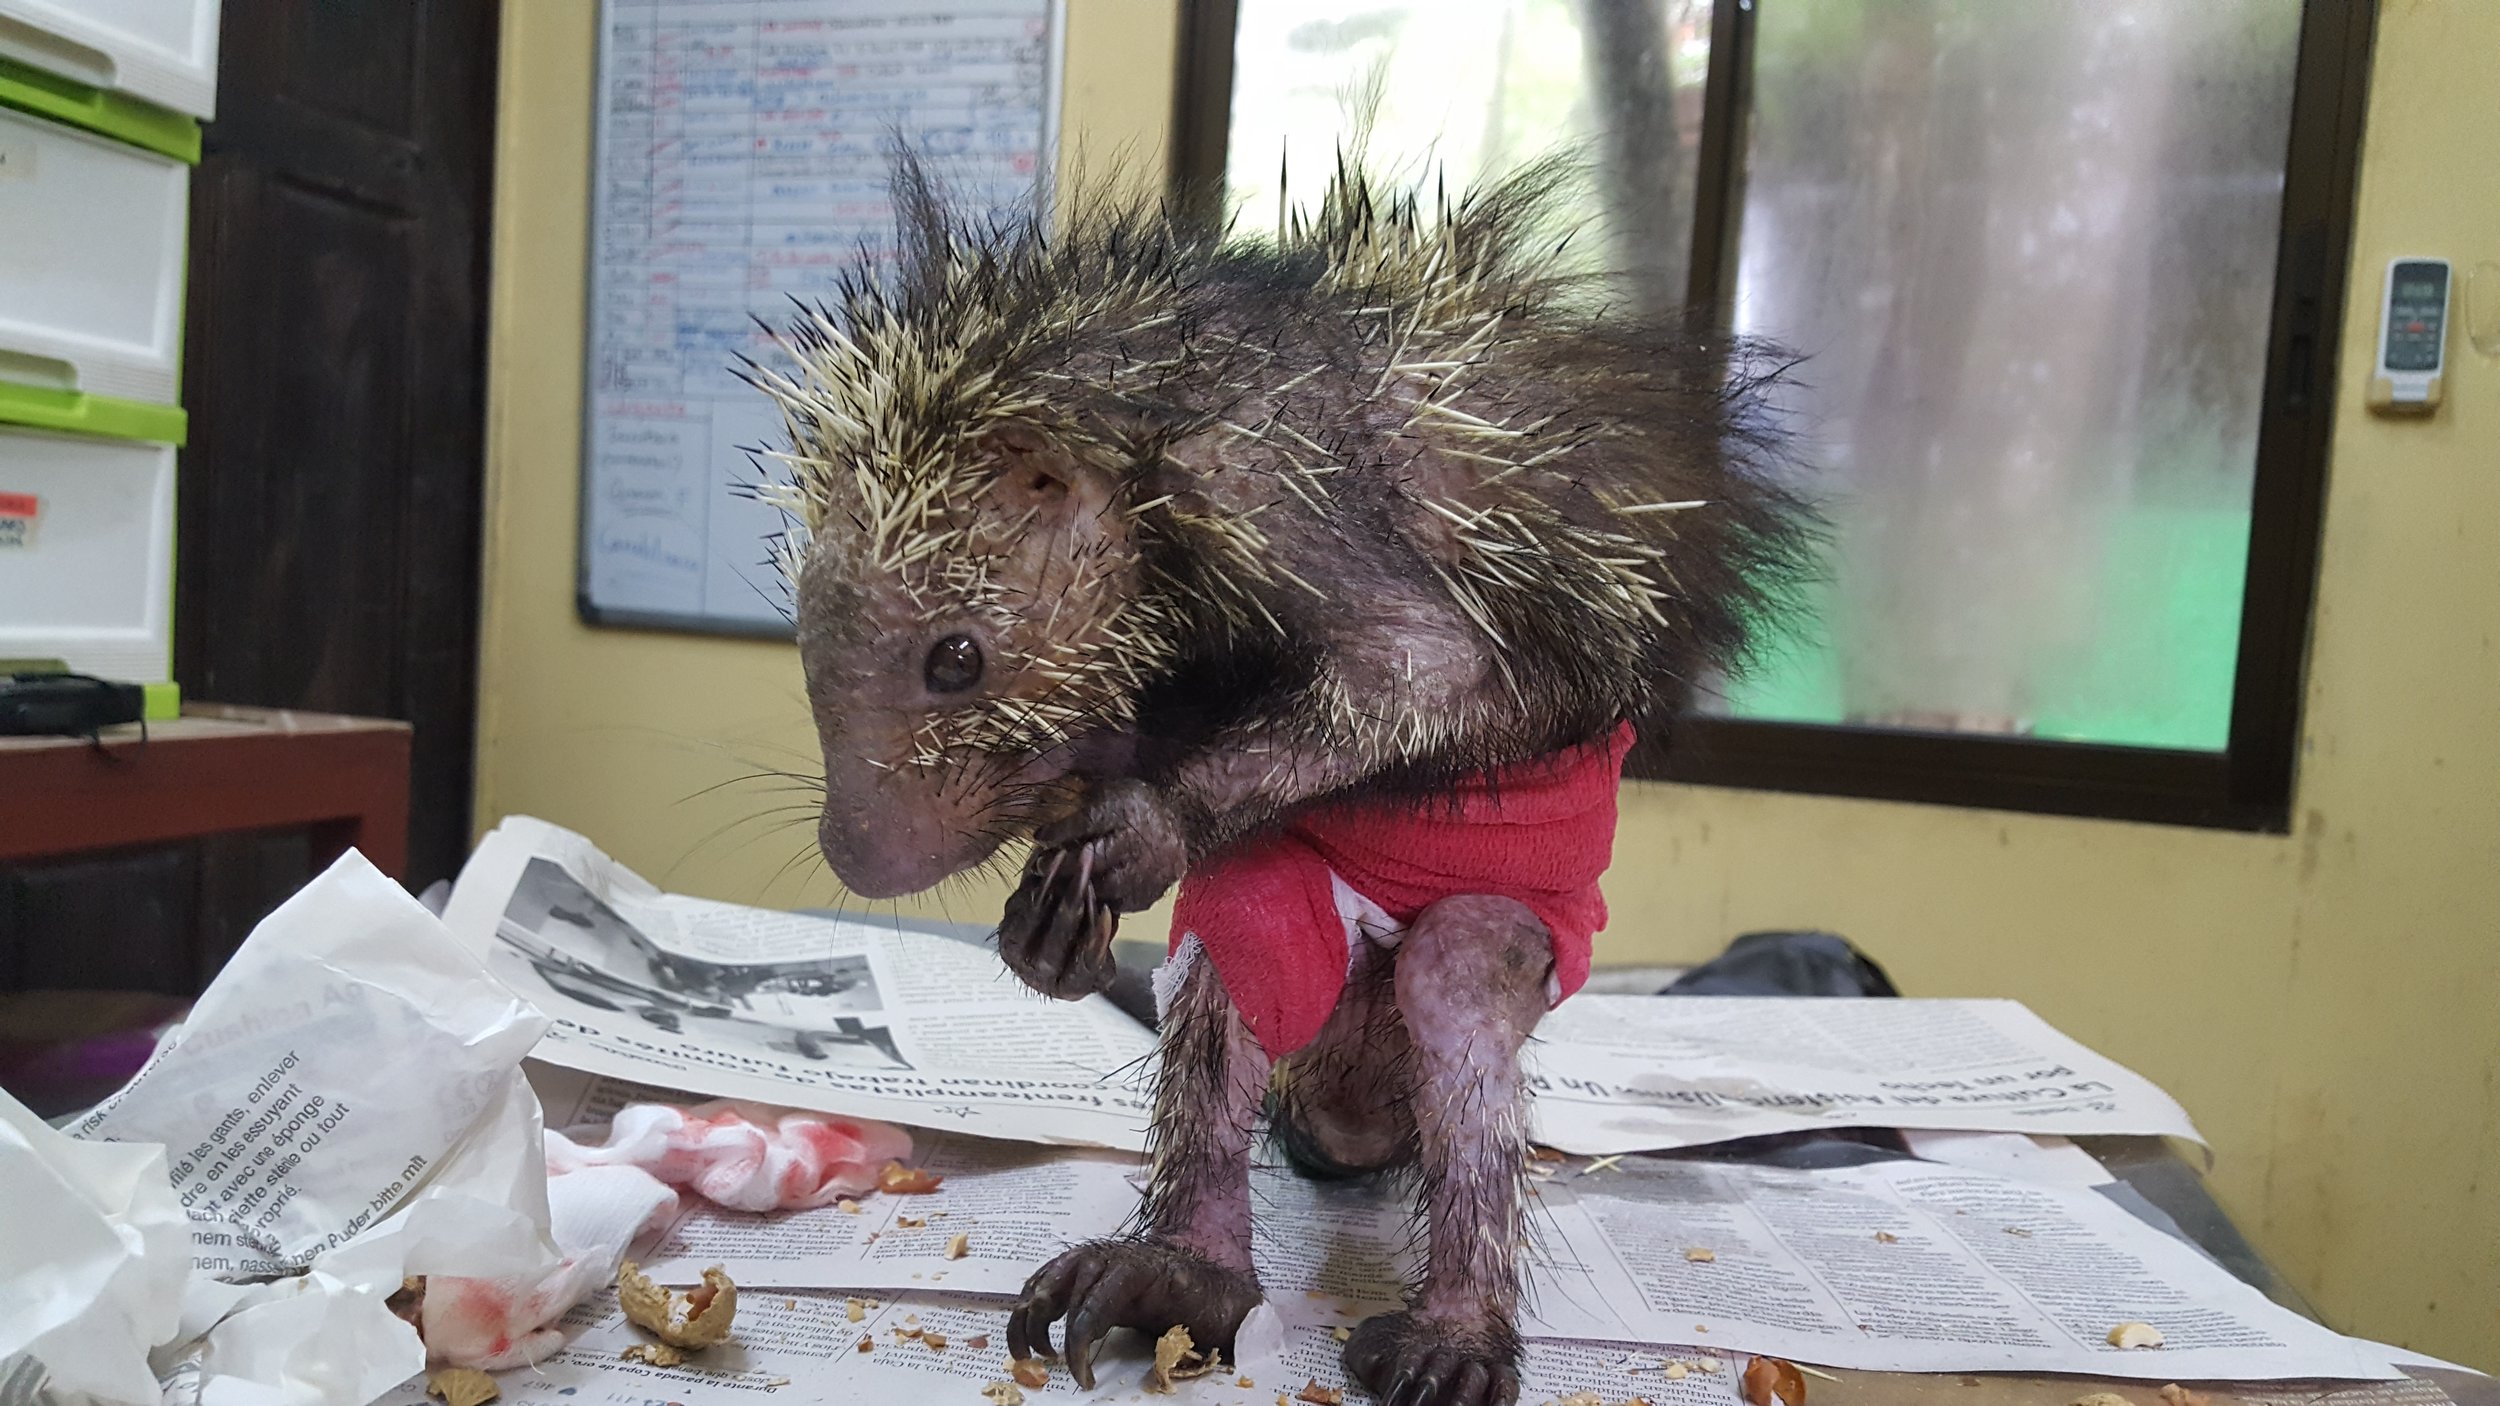 Changing the bandage on a porcupine with peanuts as a distraction